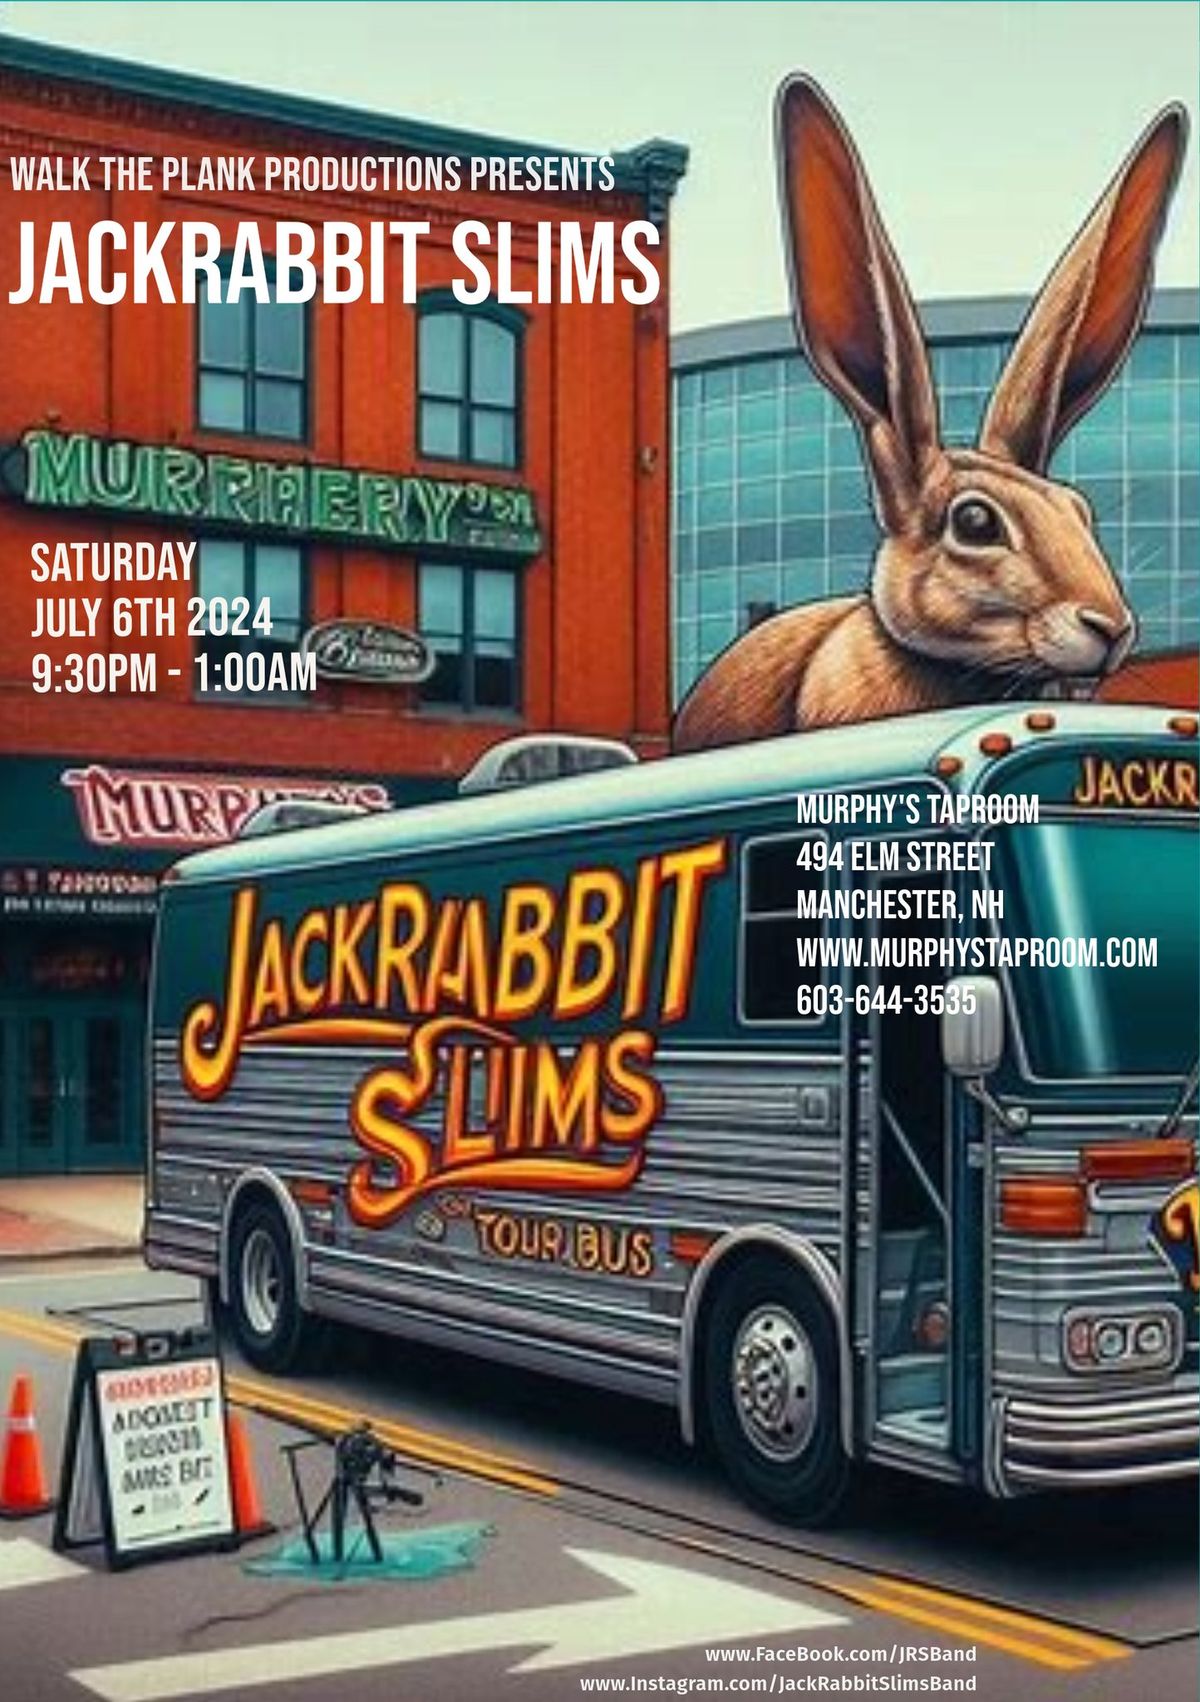 JackRabbit Slims return to Manchester to play Murphy's Taproom